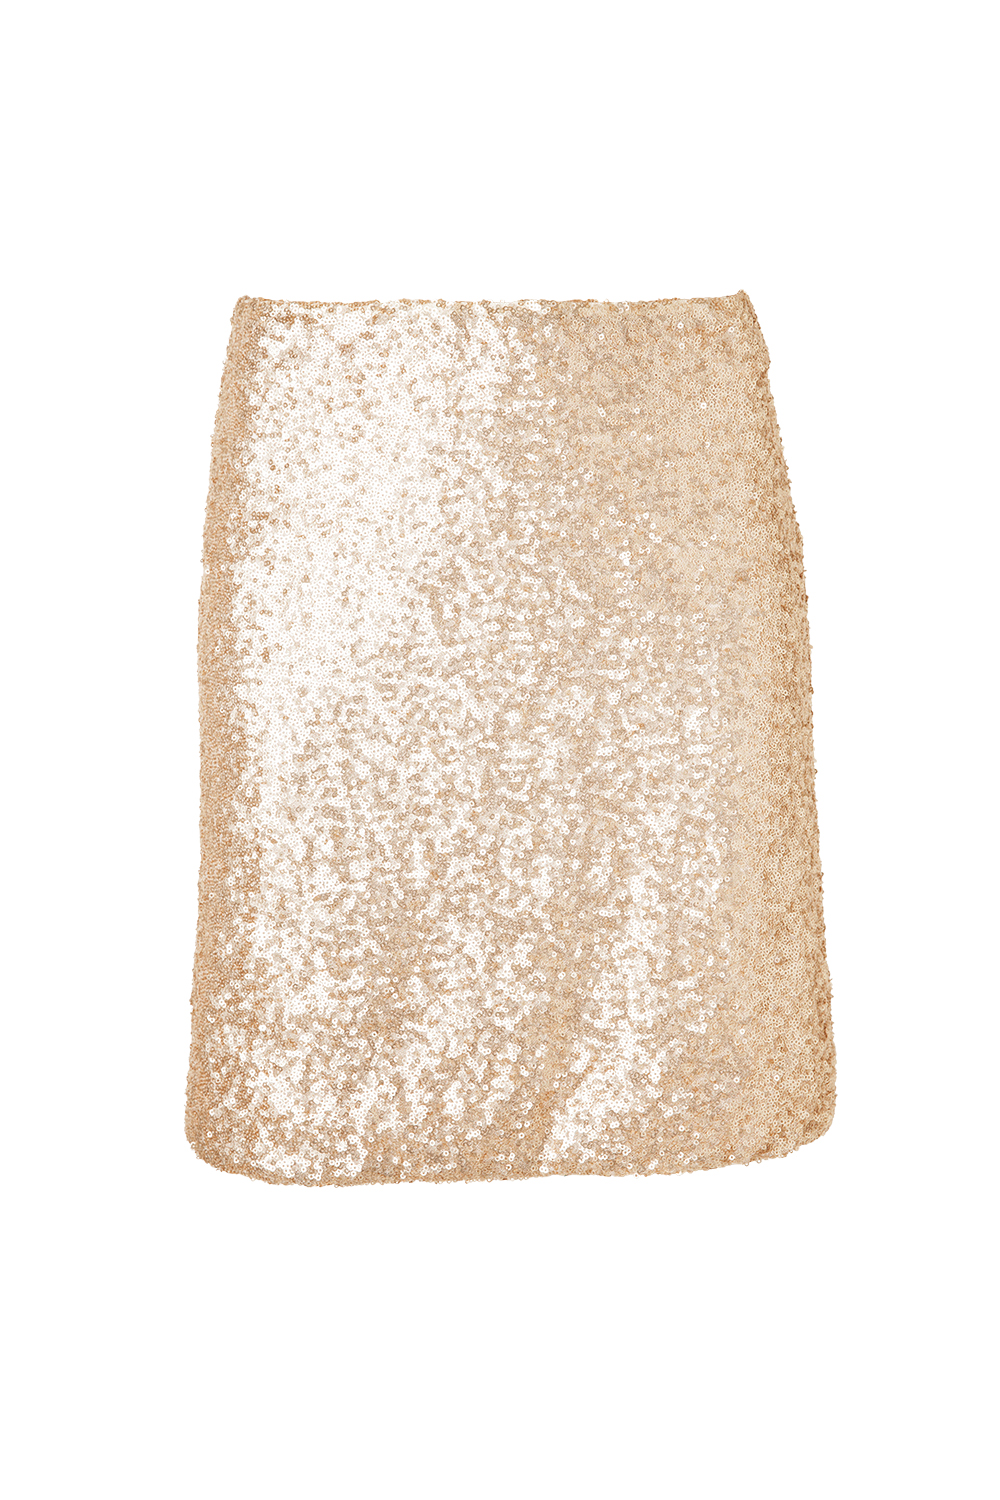 Skirt, $159, by Gus and Fannie.